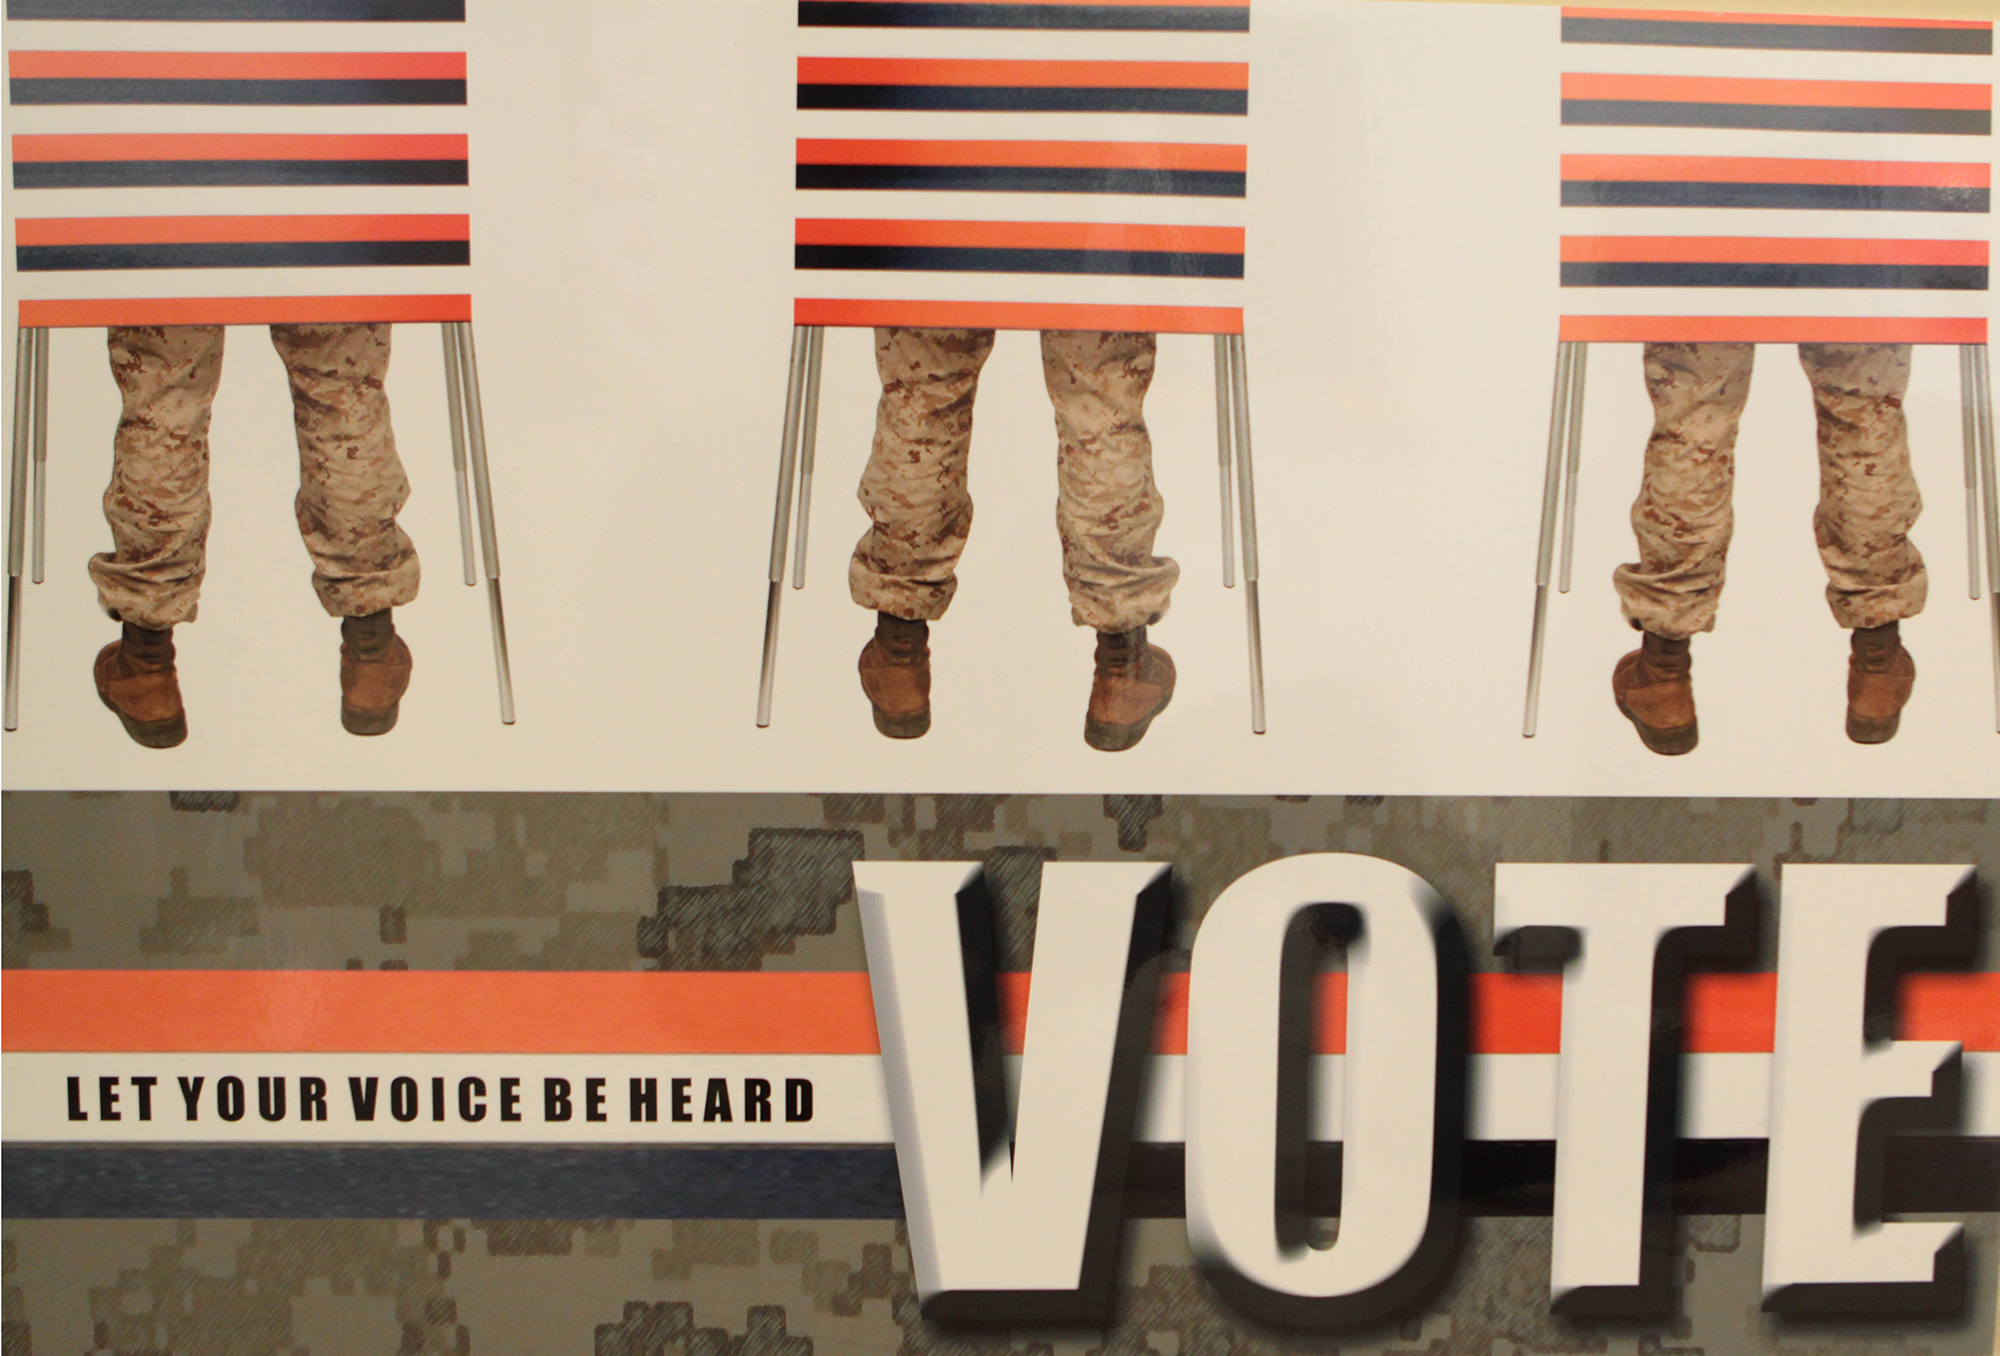 US troops routinely vote by mail. Why can't the rest of America do the same?